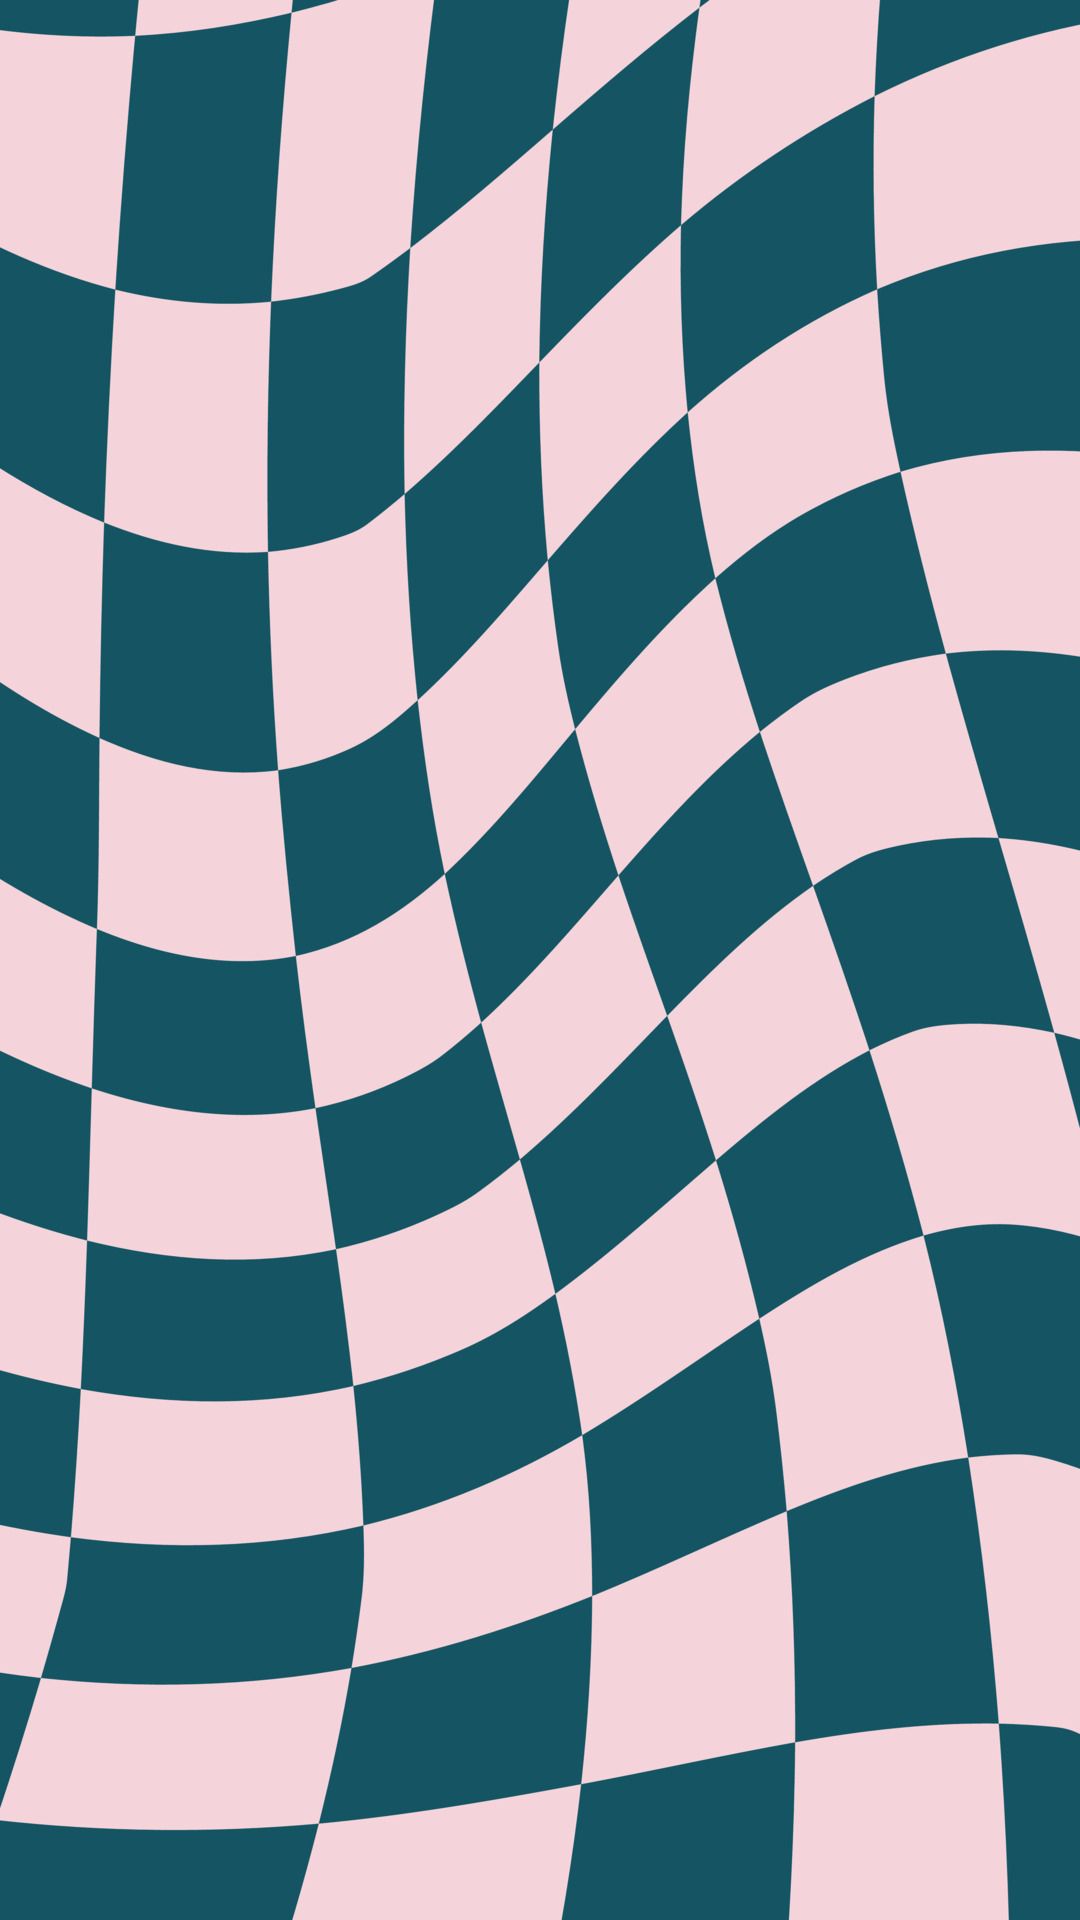 aesthetic cute distorted vertical dark blue and pink checkerboard, gingham, plaid, checkers wallpaper illustration, perfect for backdrop, wallpaper, banner, cover